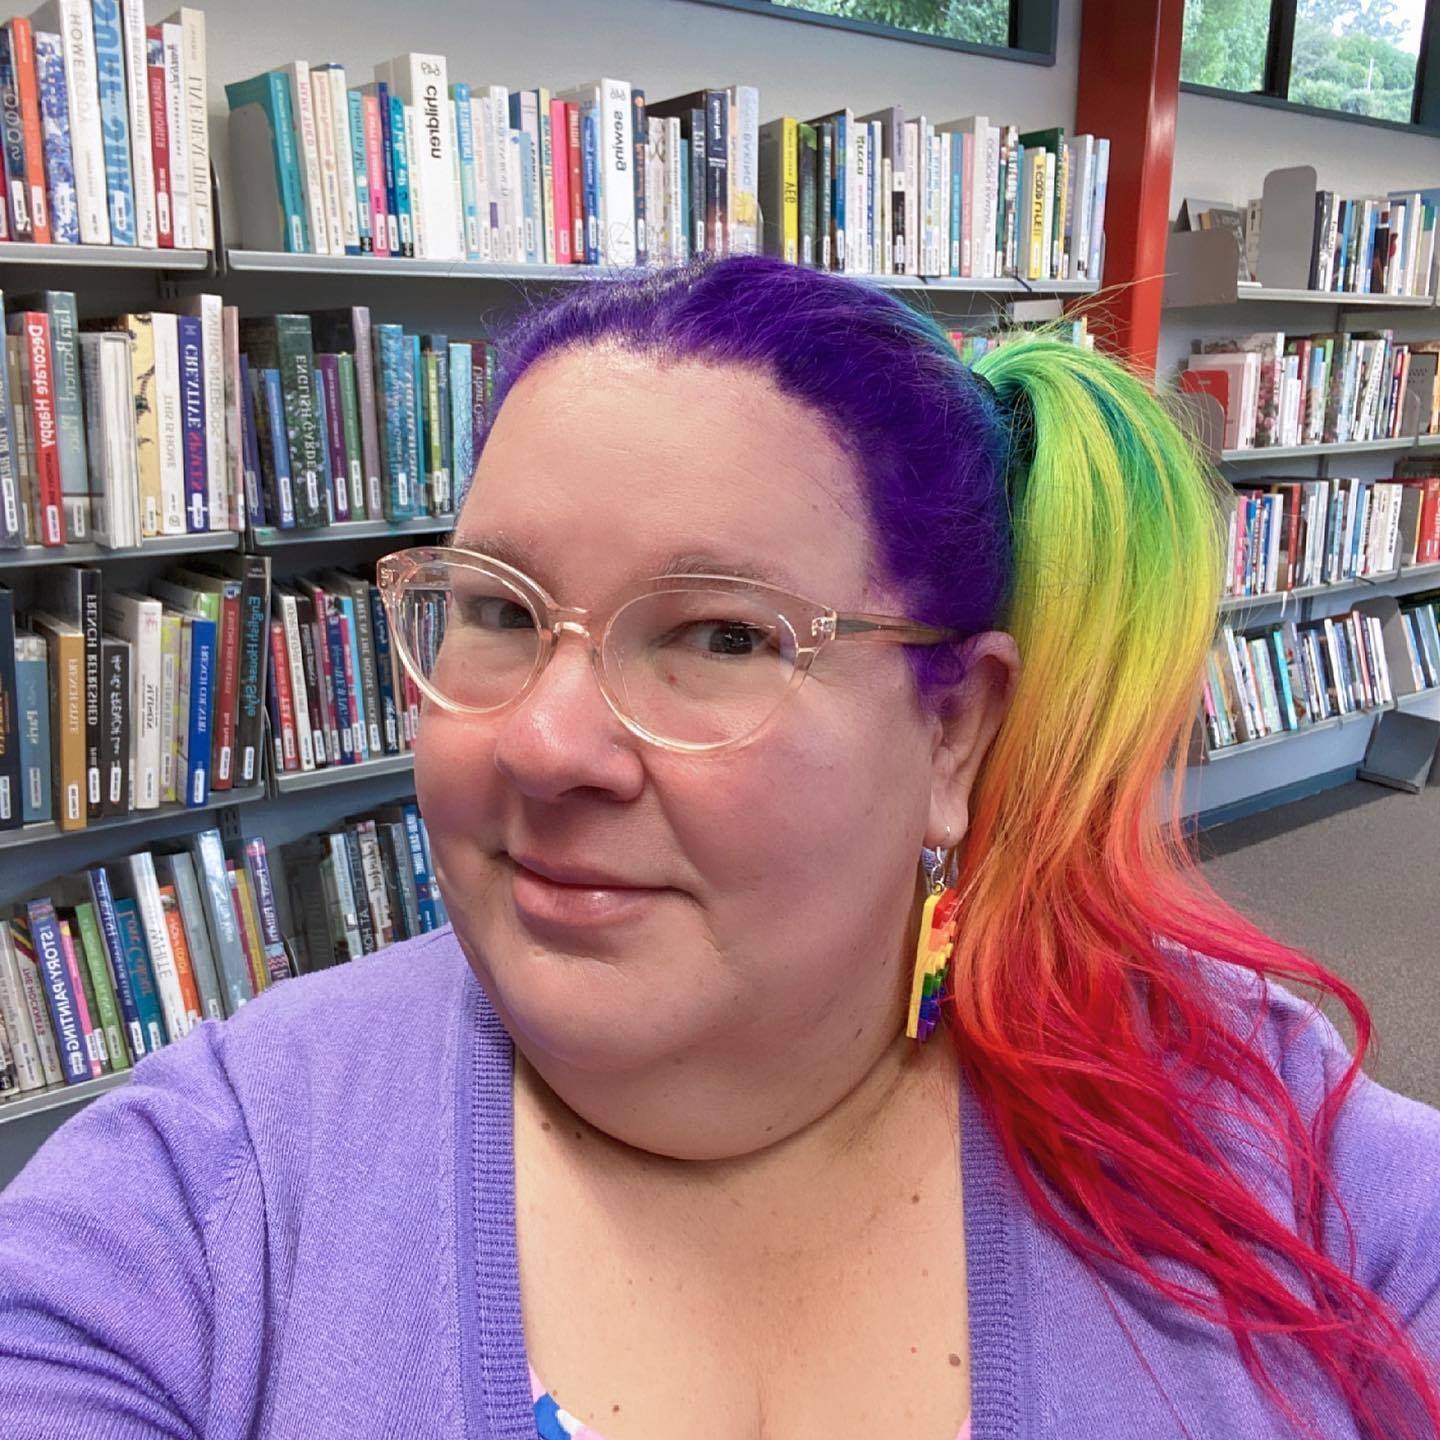 A selfie of Kath - a fat babe - in a library. Kath wears glasses and has rainbow coloured hair